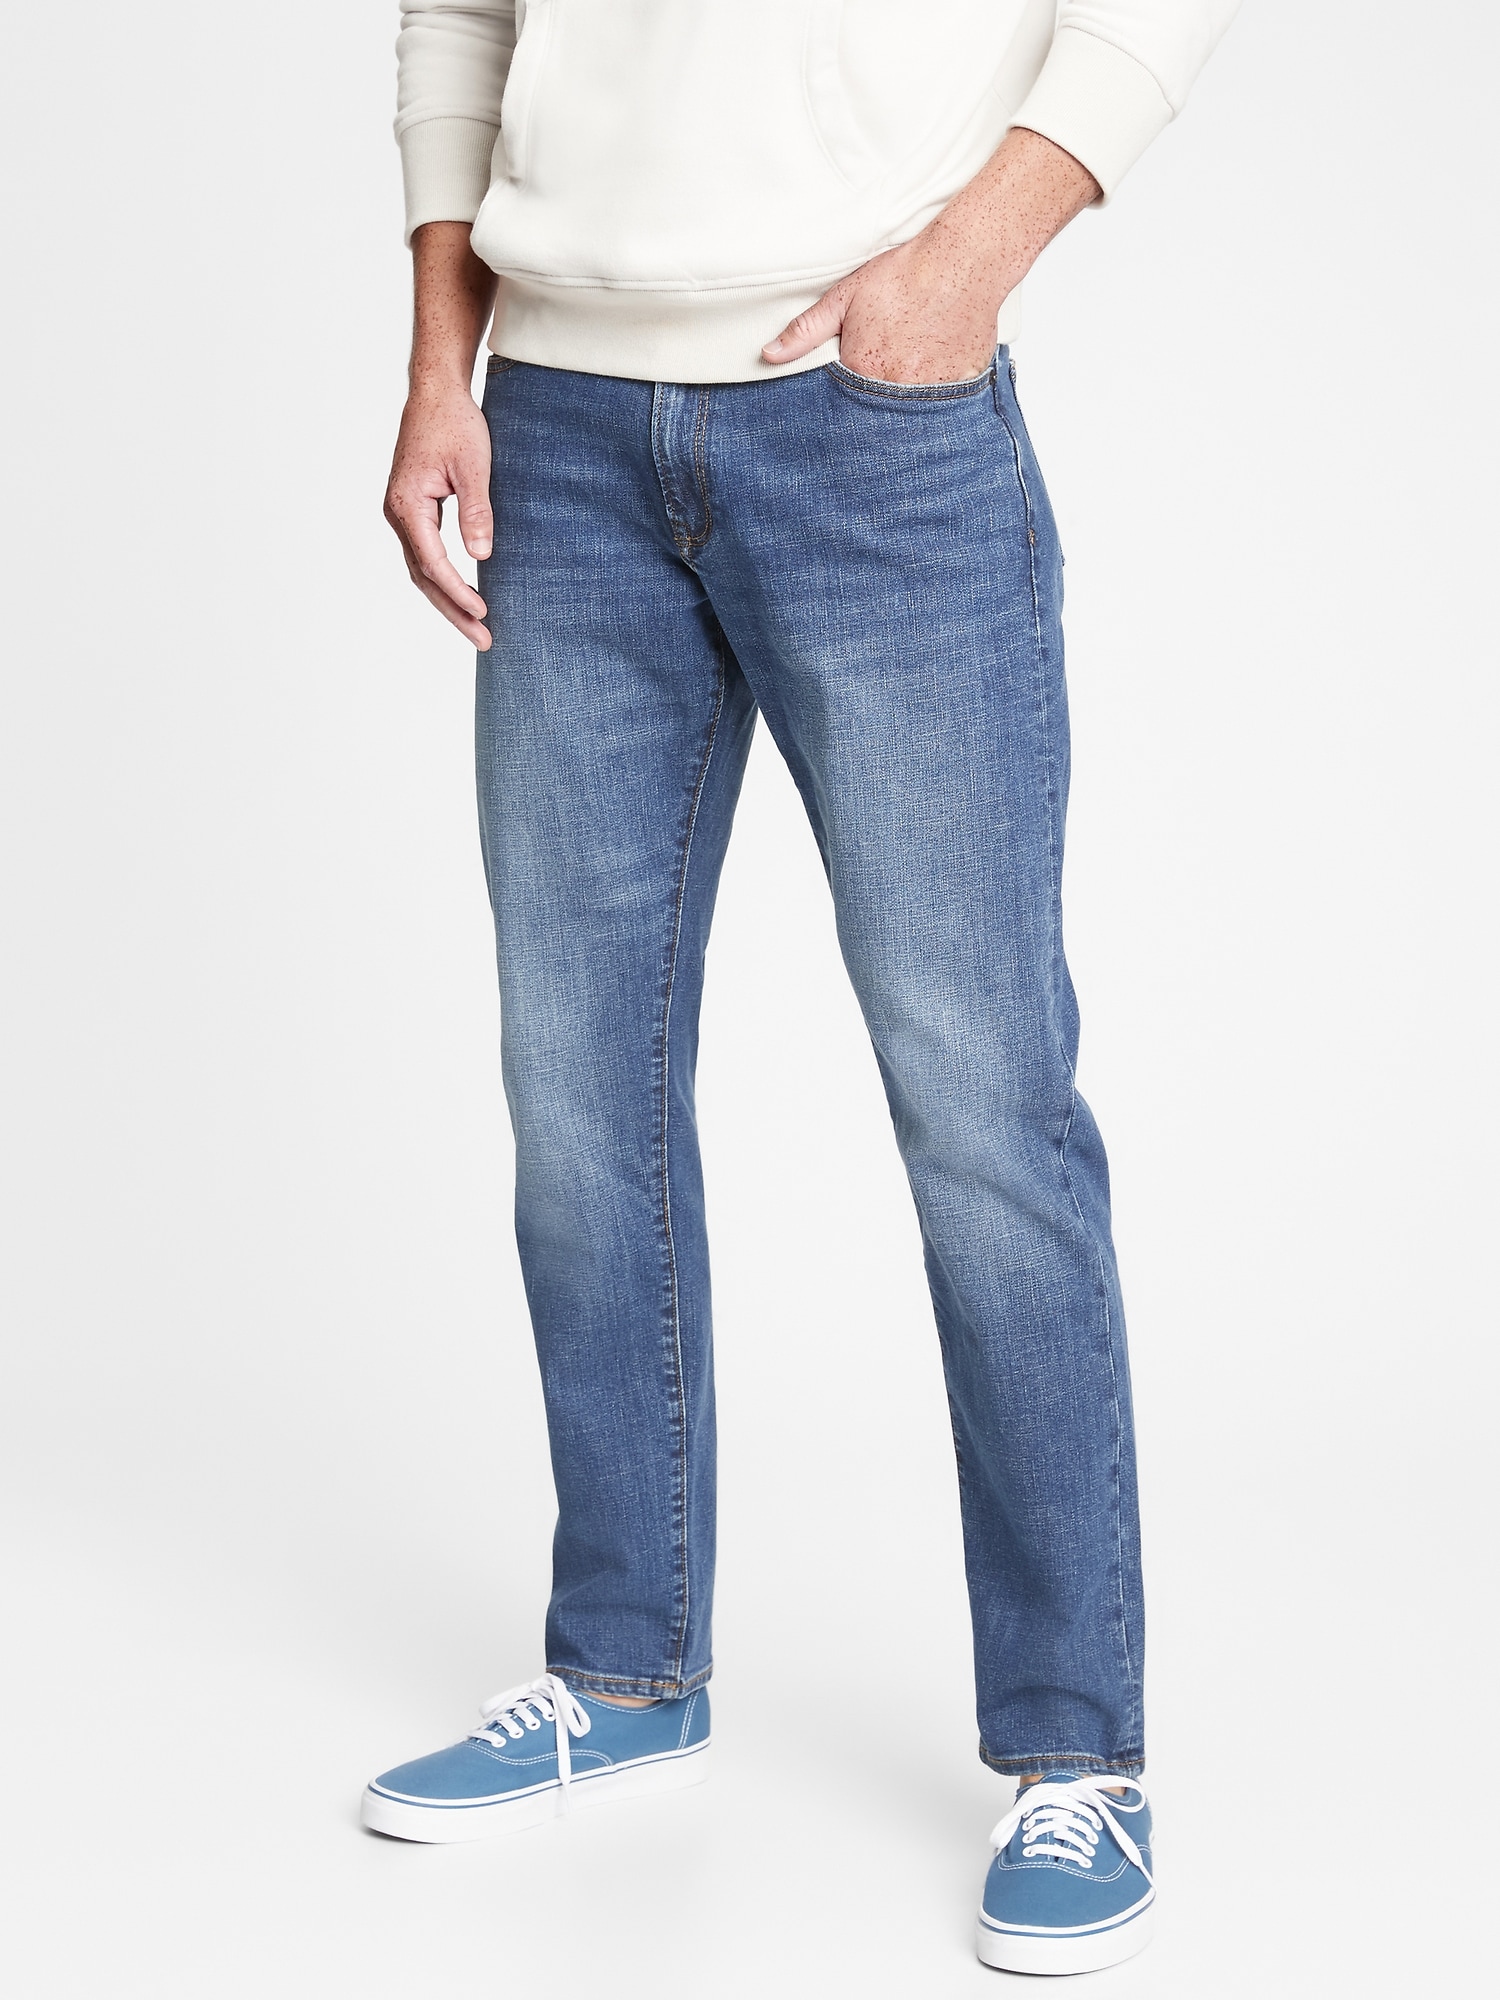 gap jeans athletic fit with gapflex